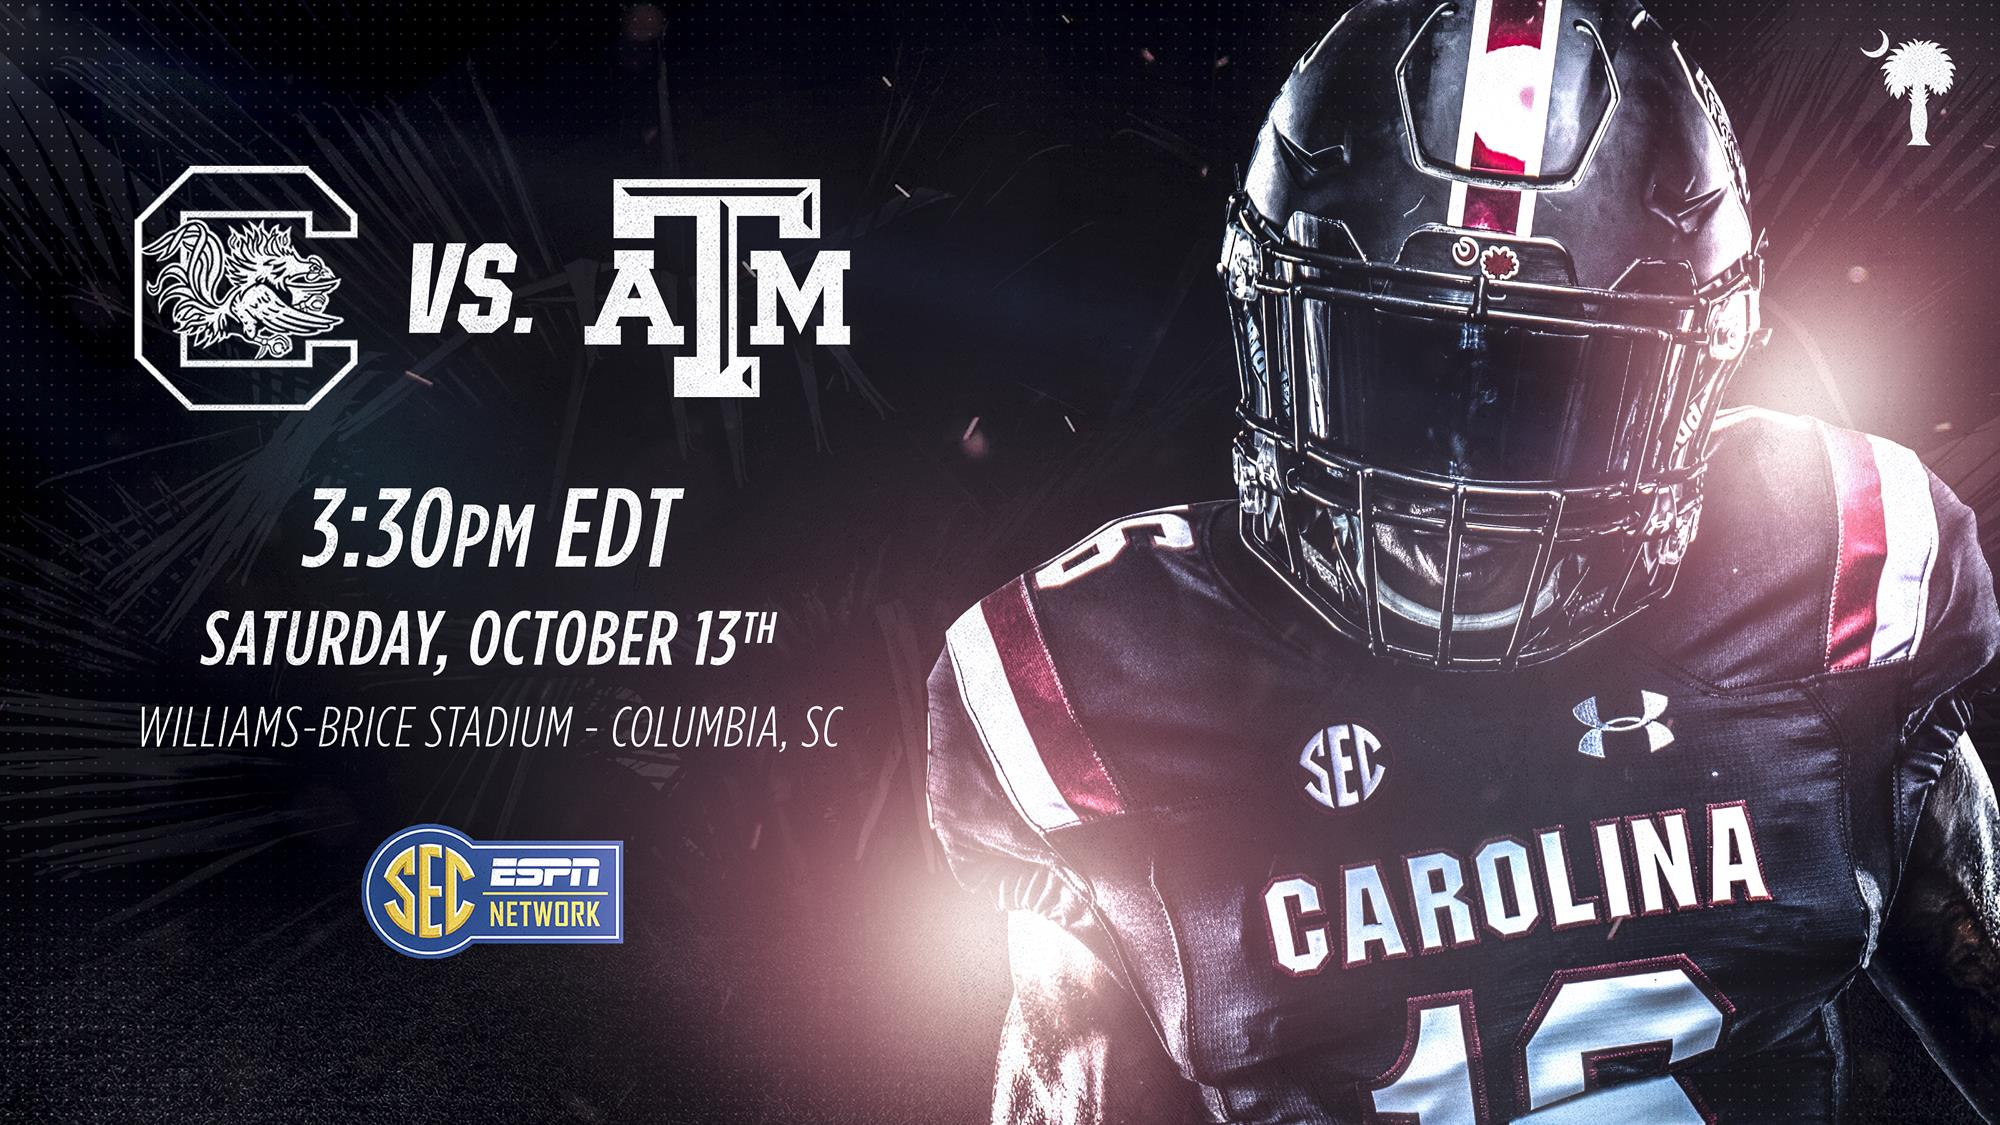 Gamecocks and Aggies to Kick at 3:30 pm on Oct. 13